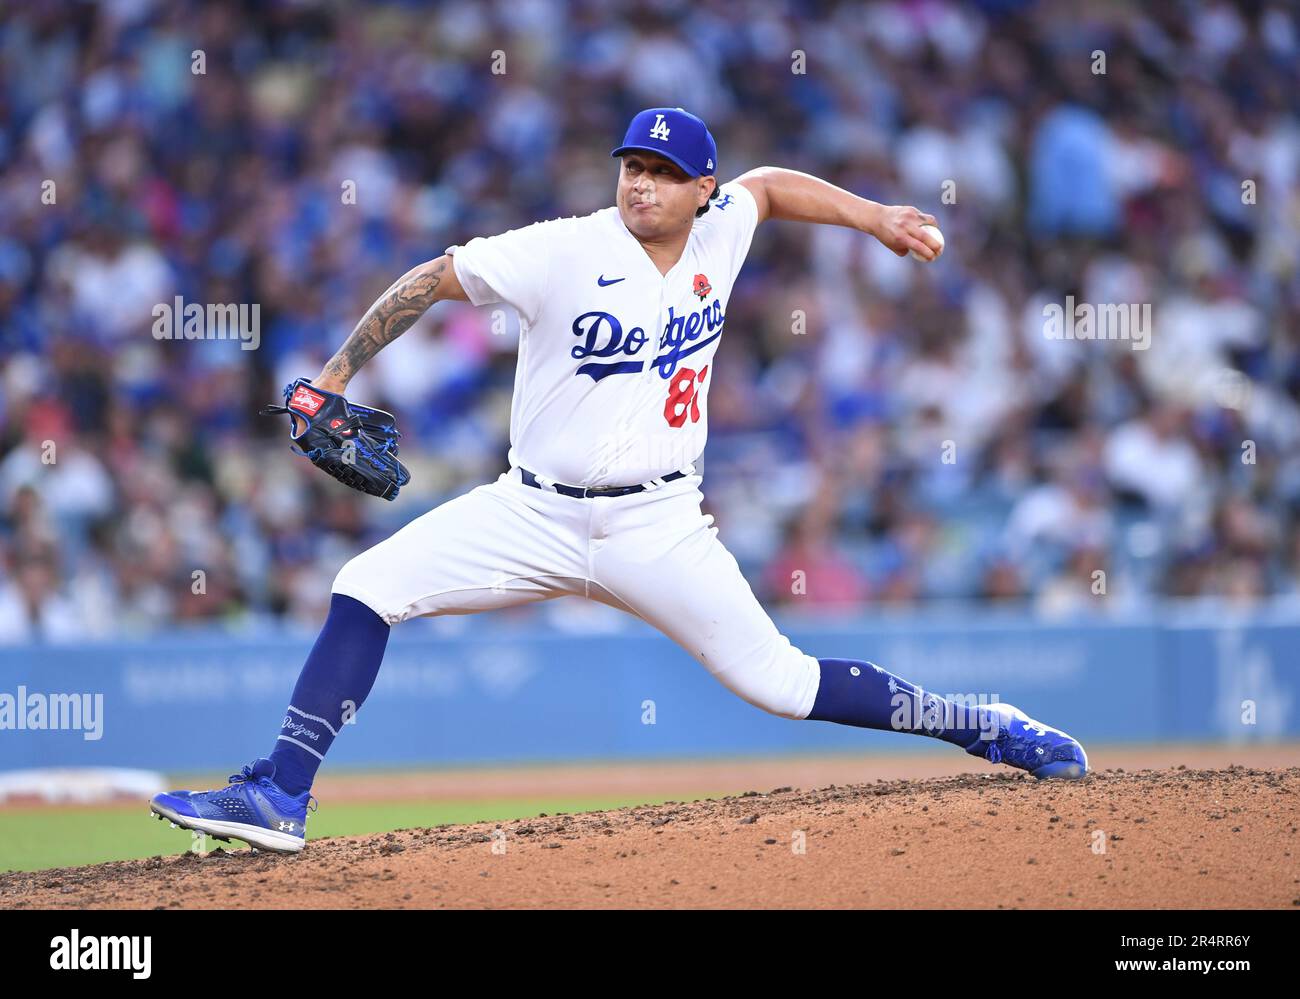 LOS ANGELES, CA - MAY 29: Los Angeles Dodgers relief pitcher